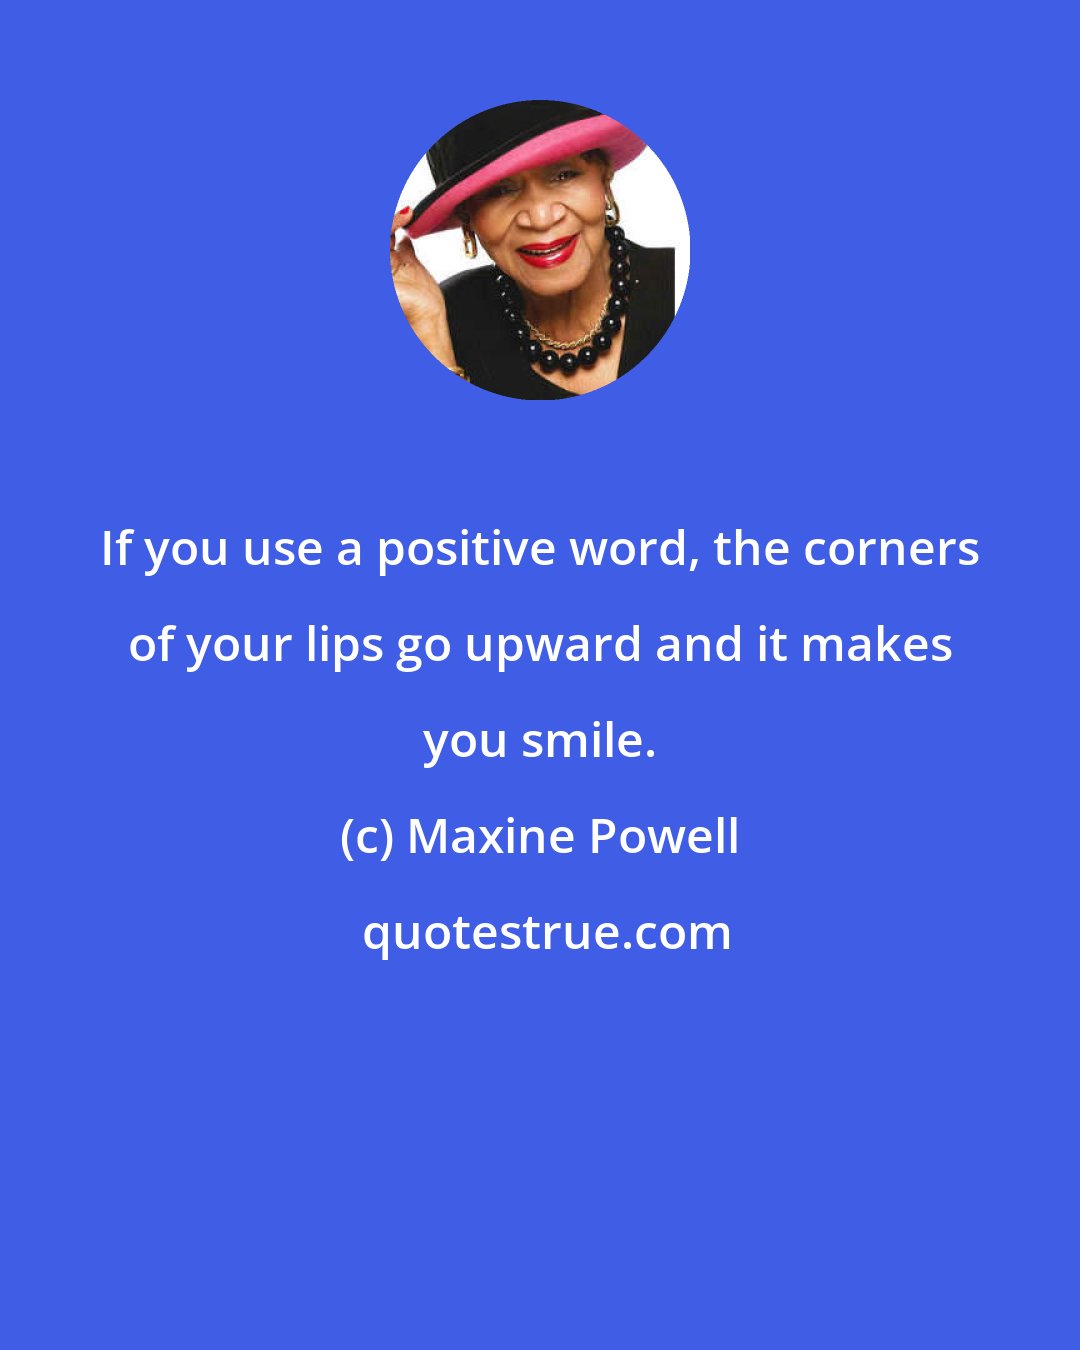 Maxine Powell: If you use a positive word, the corners of your lips go upward and it makes you smile.